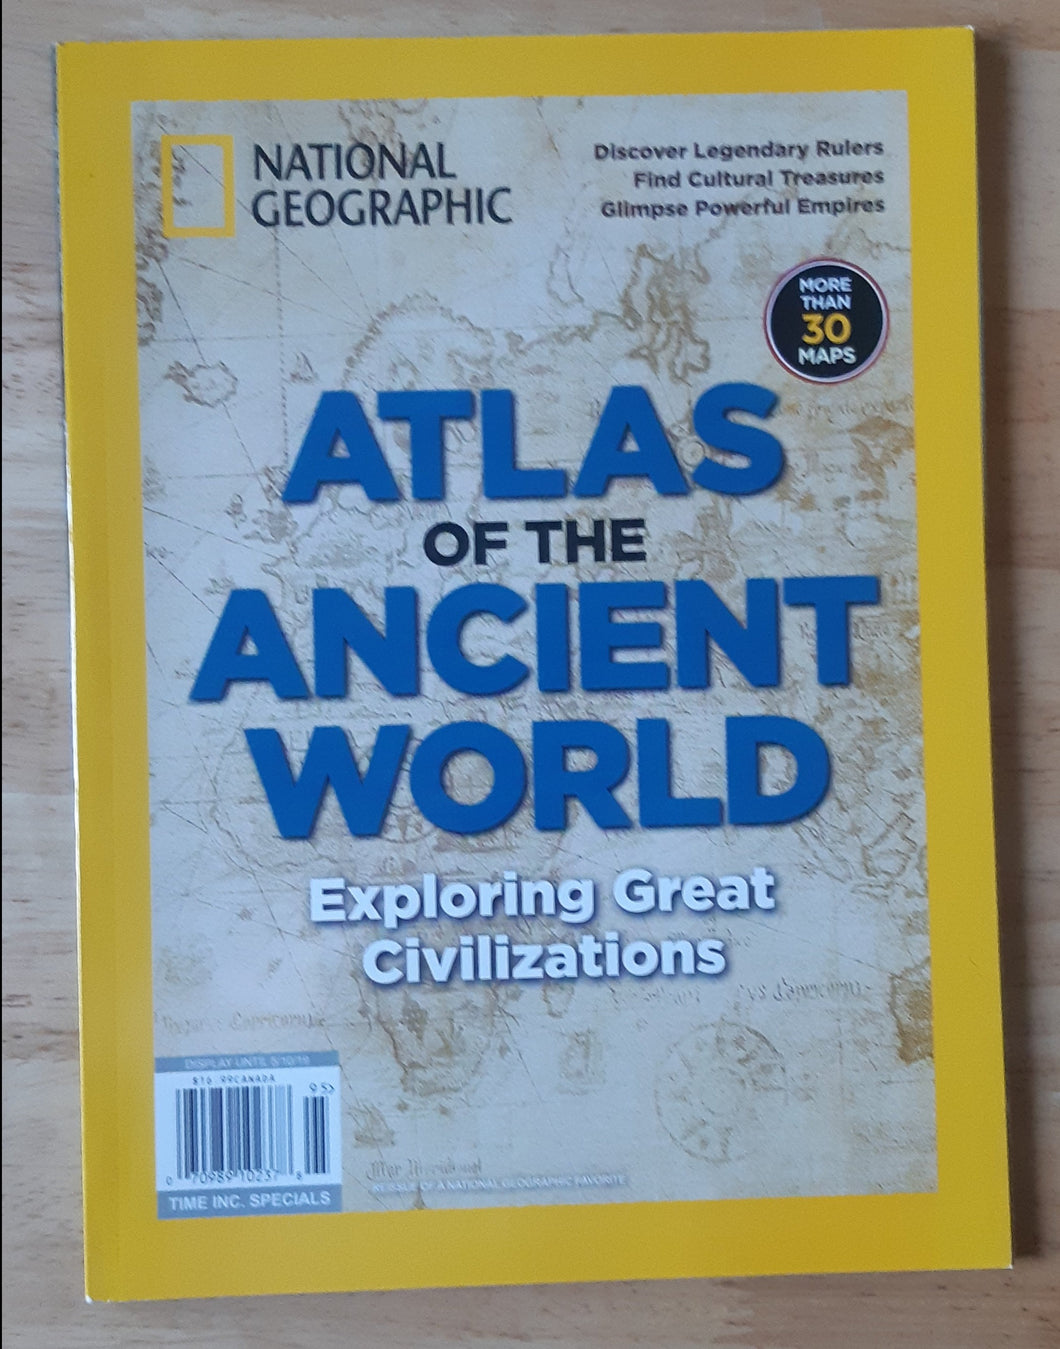 National Geographic: Atlas of the Ancient World - Special Publication